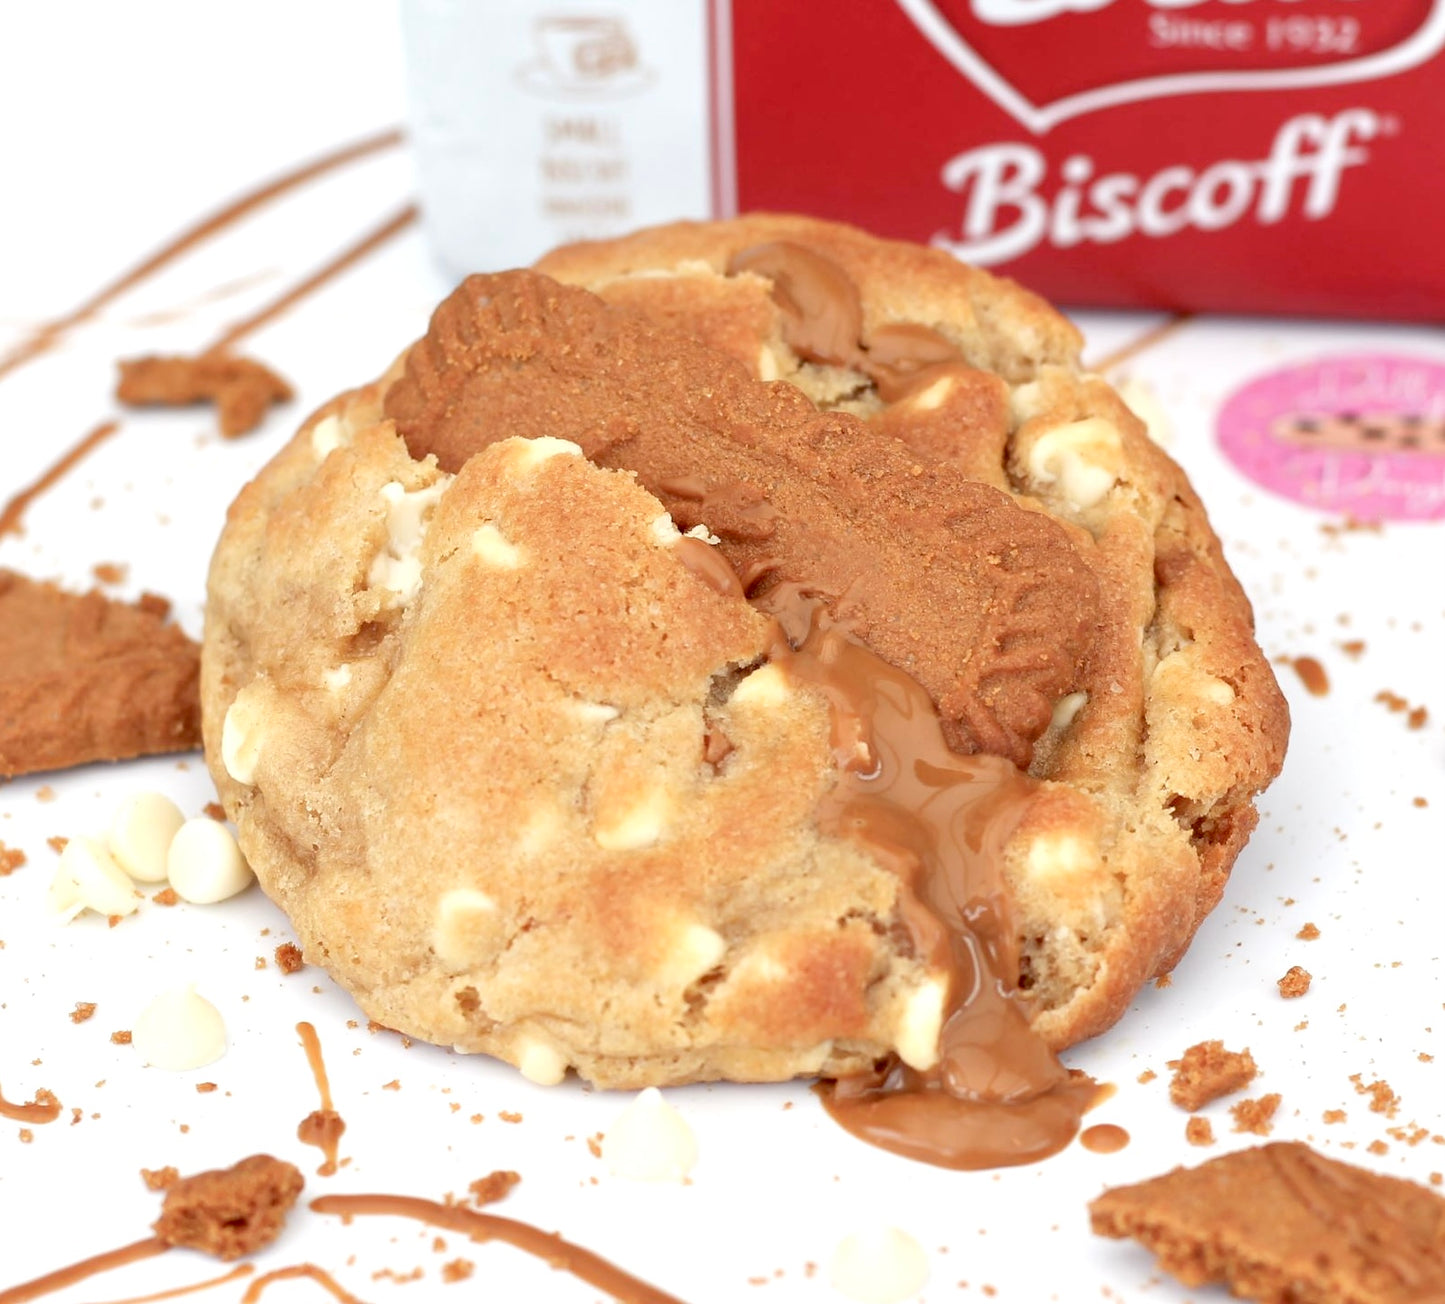 The White Choccy Biscoffy - Dollys Dough New York Style Cookies